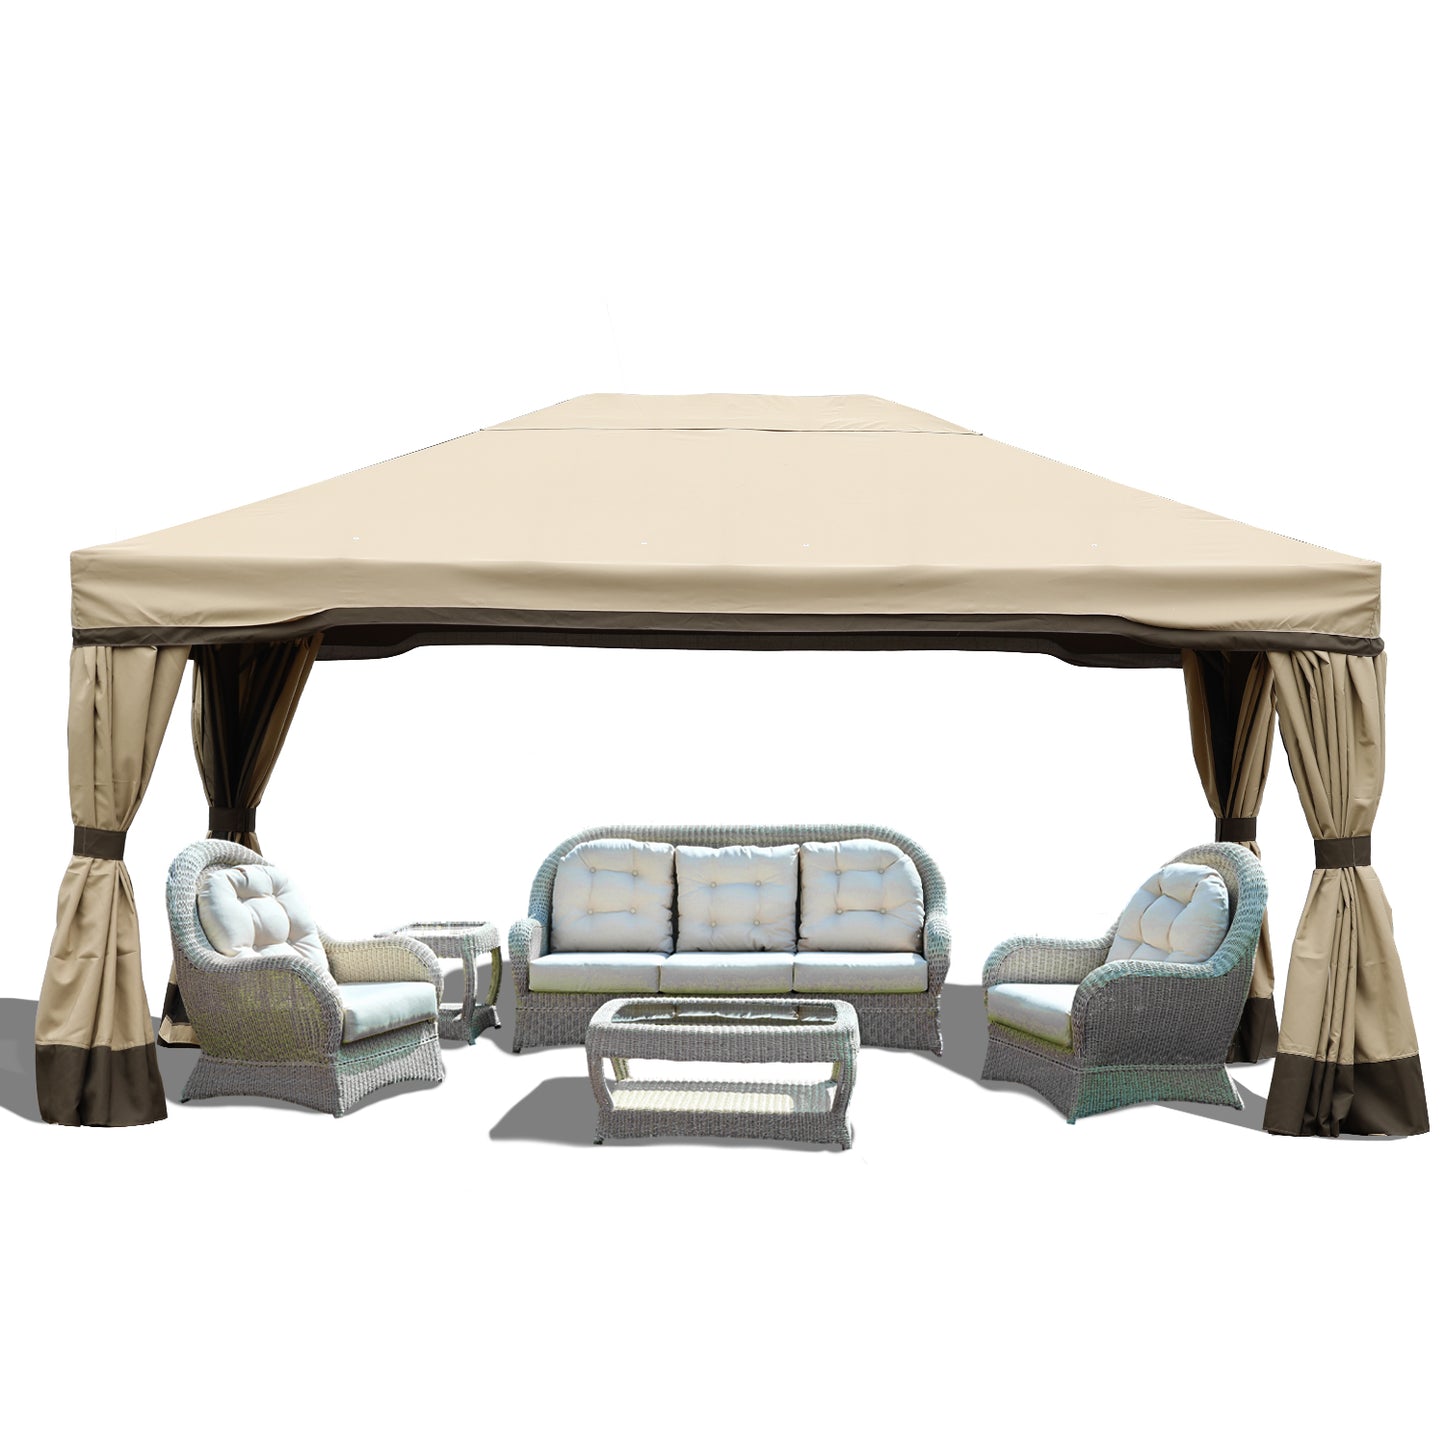 Canopy for 16 x 12 ft. Outdoor Gazebo (Canopy Only)  - Brown